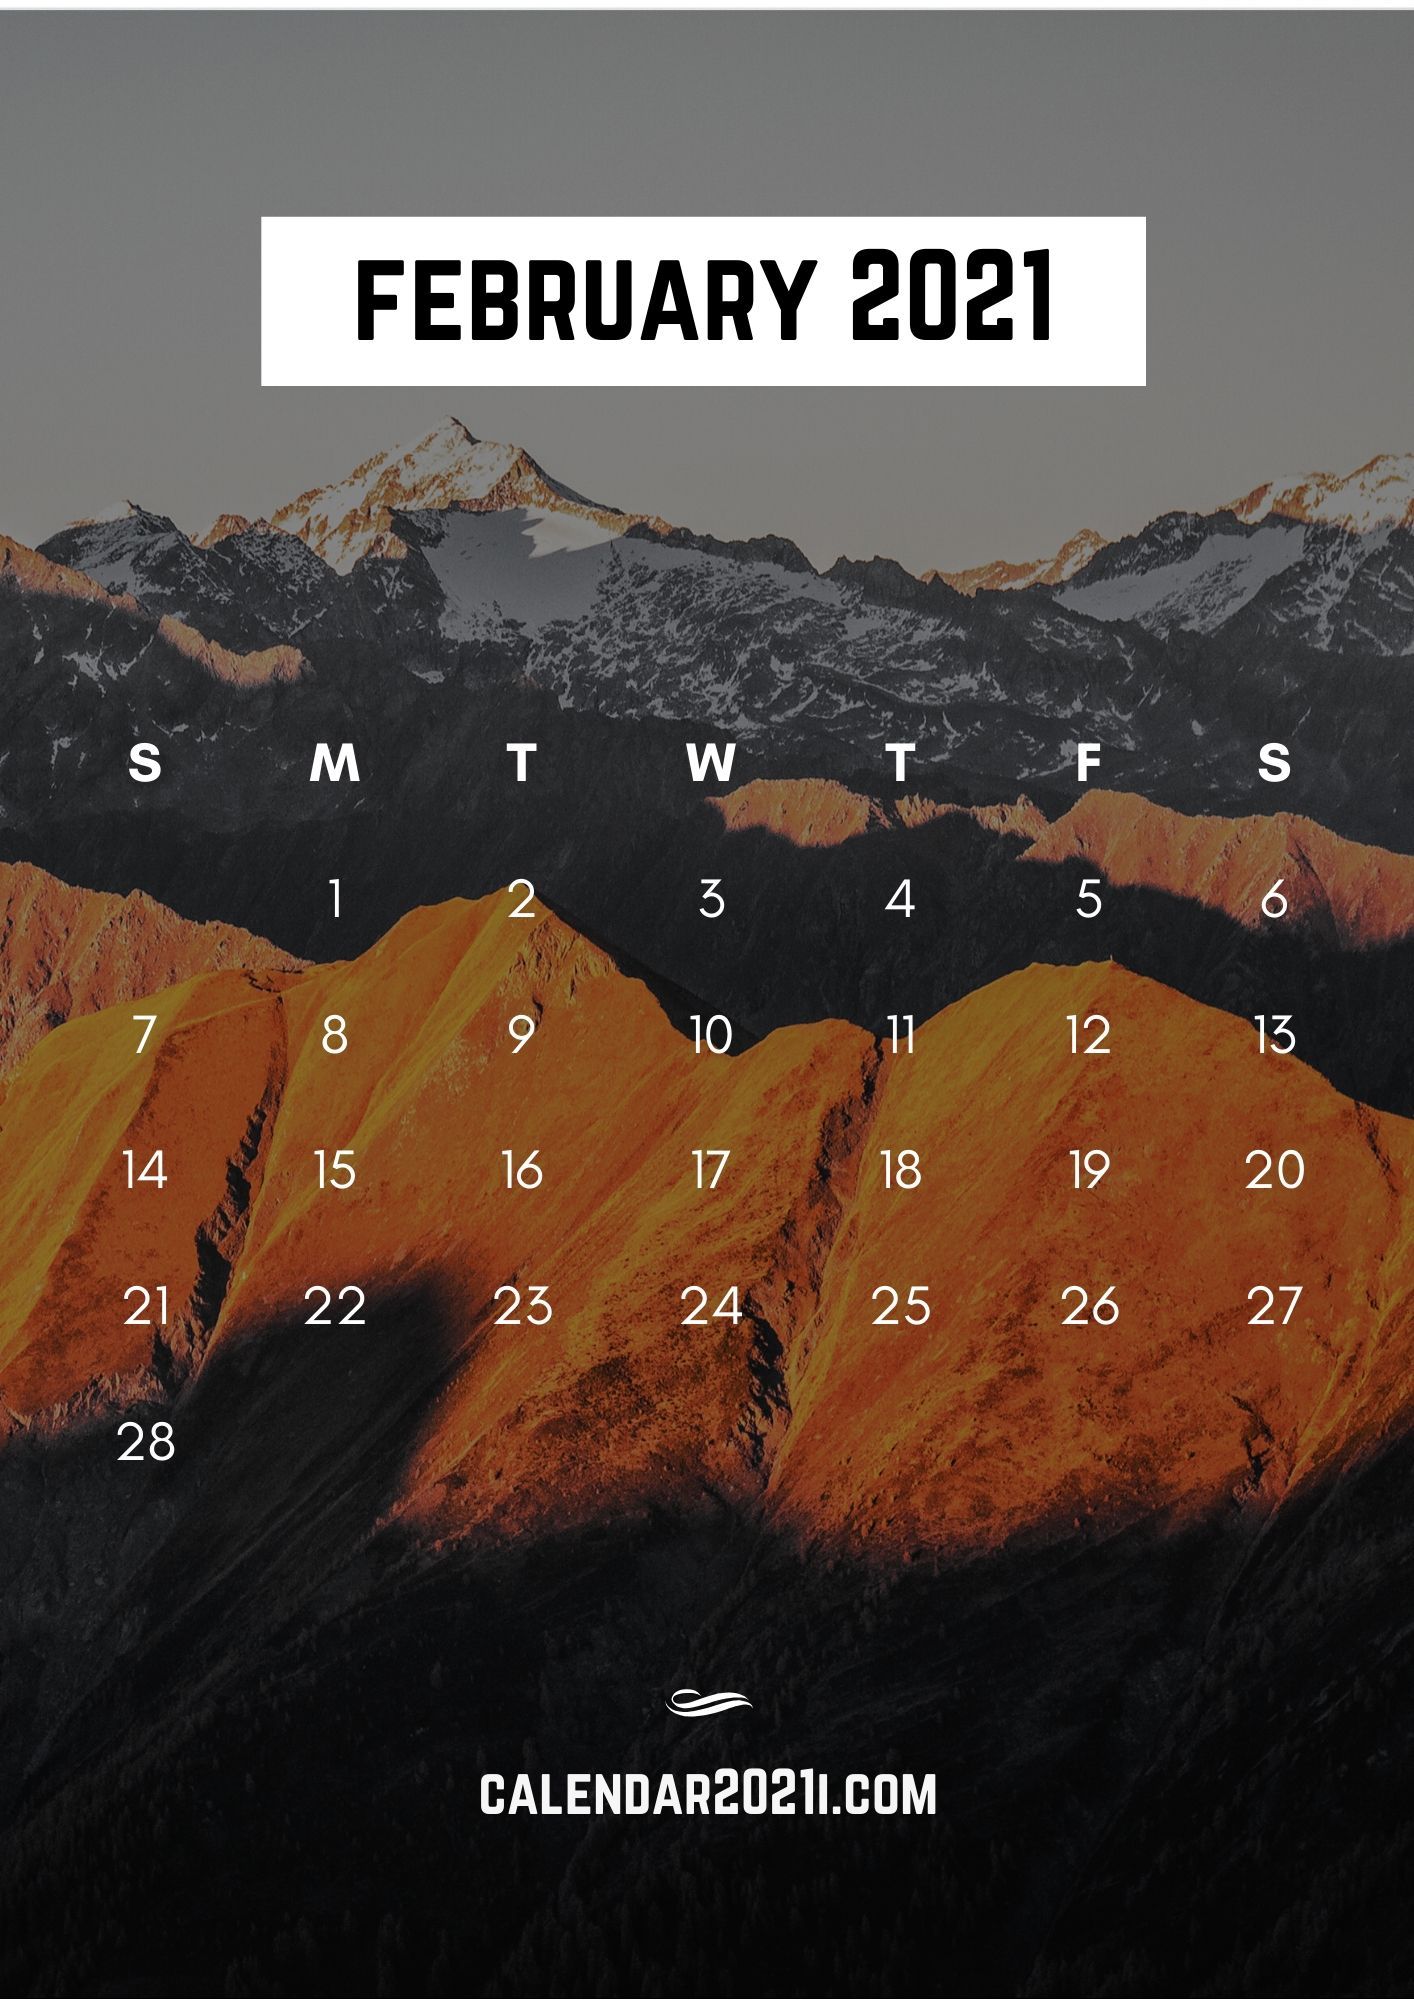 February Calendar iPhone HD Wallpaper For Mobile S Background